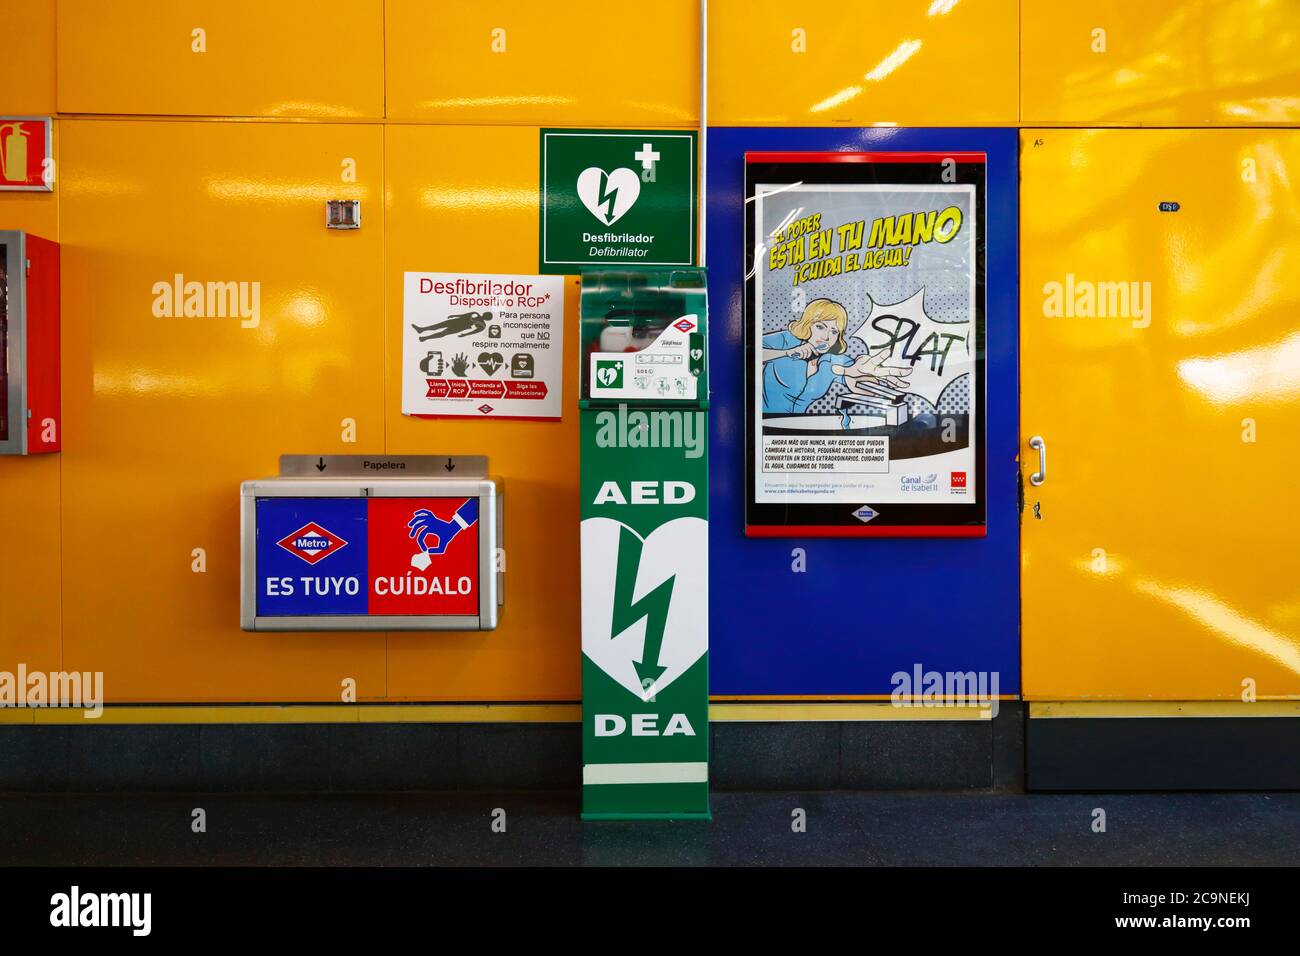 Defibrillator and first aid equipment at emergency station in metro station, Madrid, Spain Stock Photo